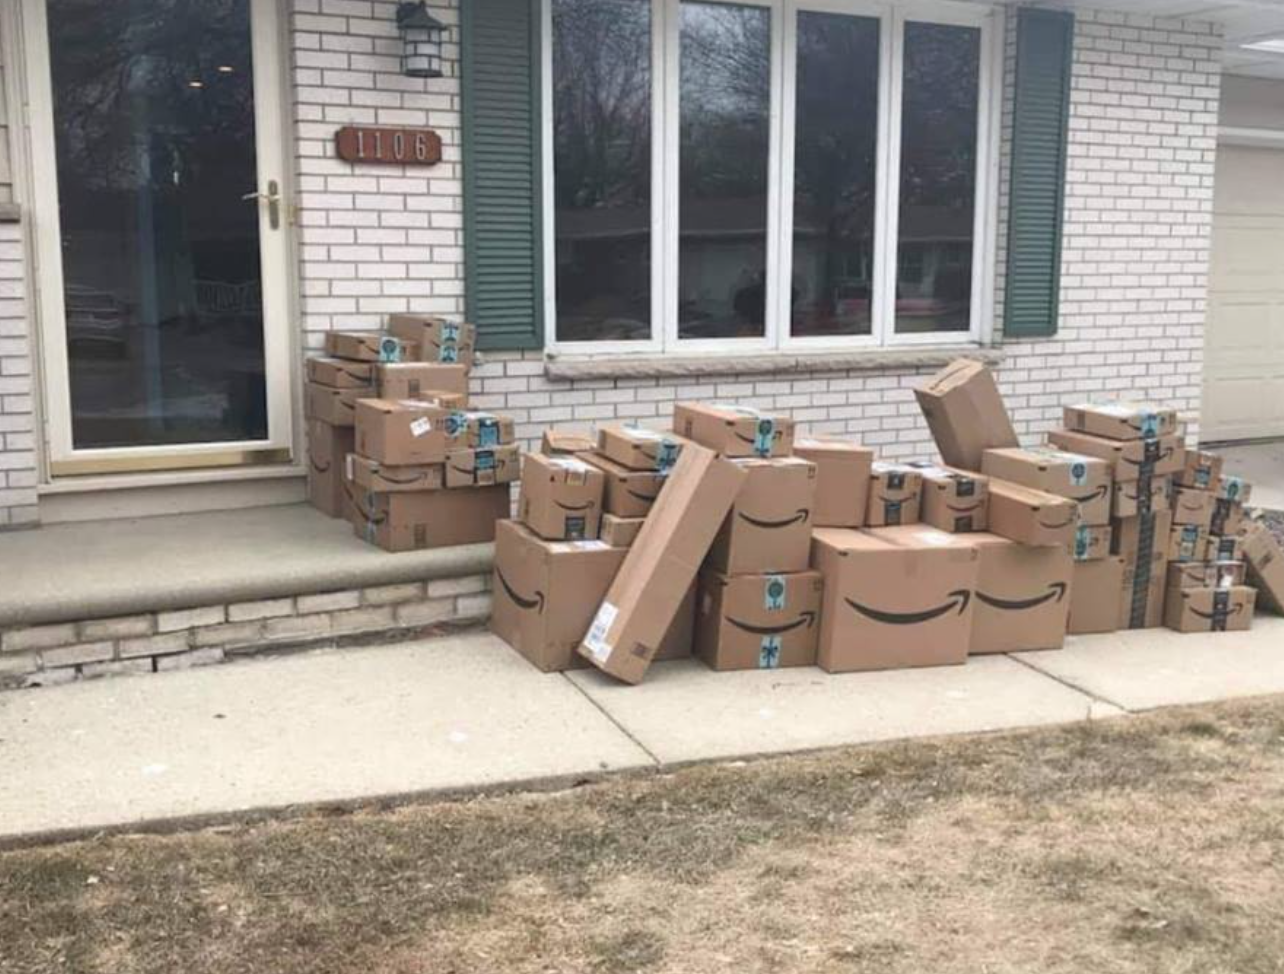 Man's wife saves all her Amazon purchase boxes from the past 2 years to place on her porch for her husband to come home and see this April 1.